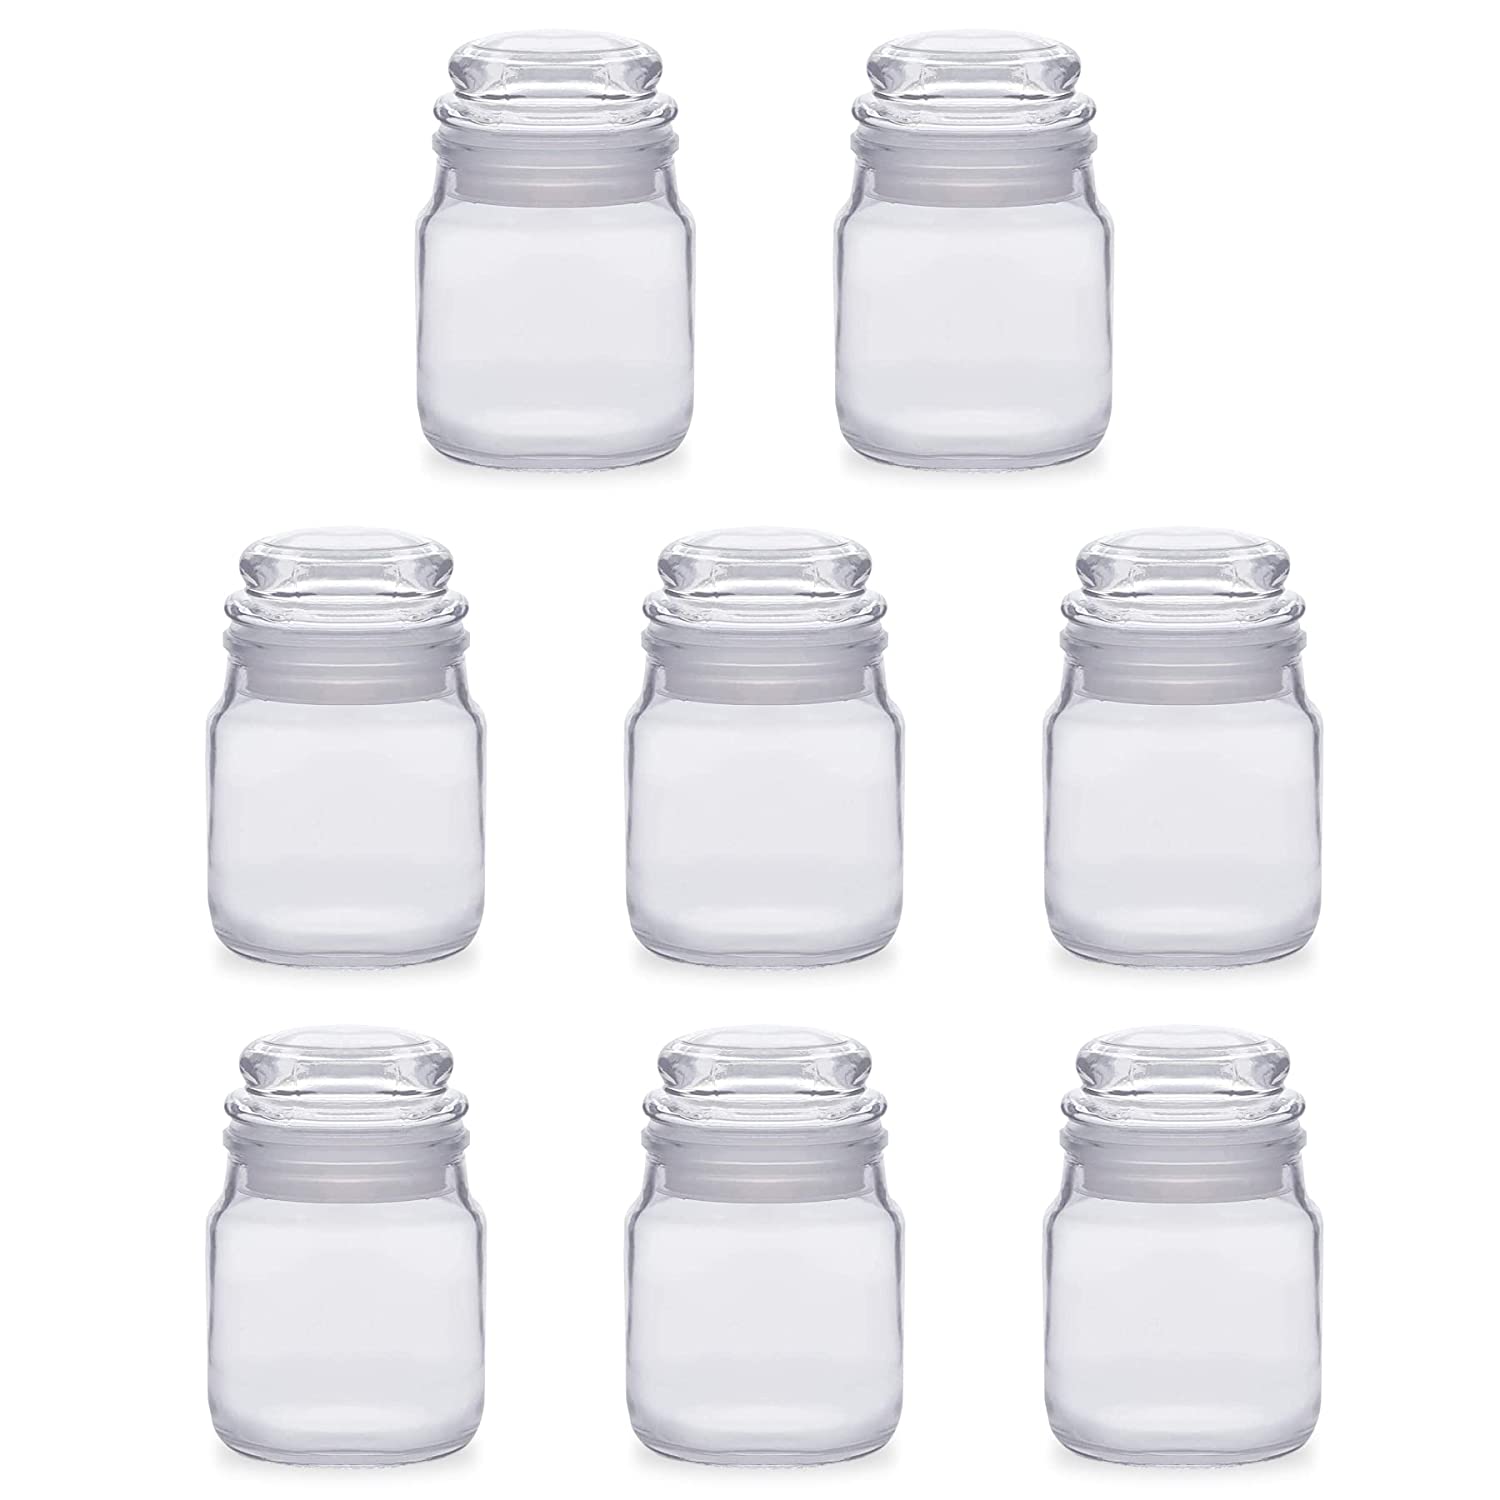 Shoprythm Packaging,Cosmetic Jar Pack of 8 Transparent glass jar with airtight lid